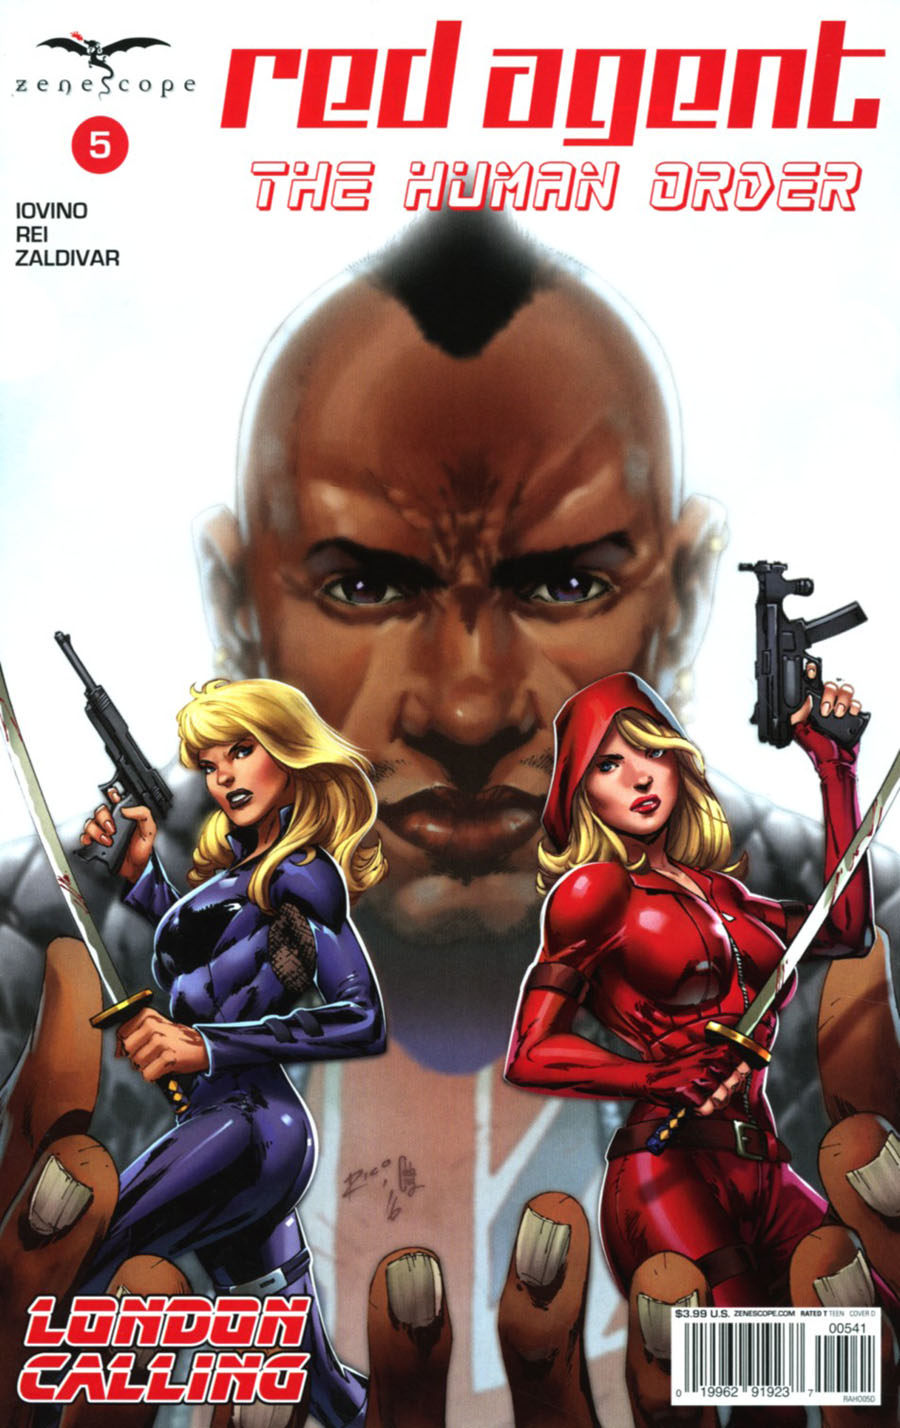 Grimm Fairy Tales Presents Red Agent Human Order #5 Cover D Ian Richardson